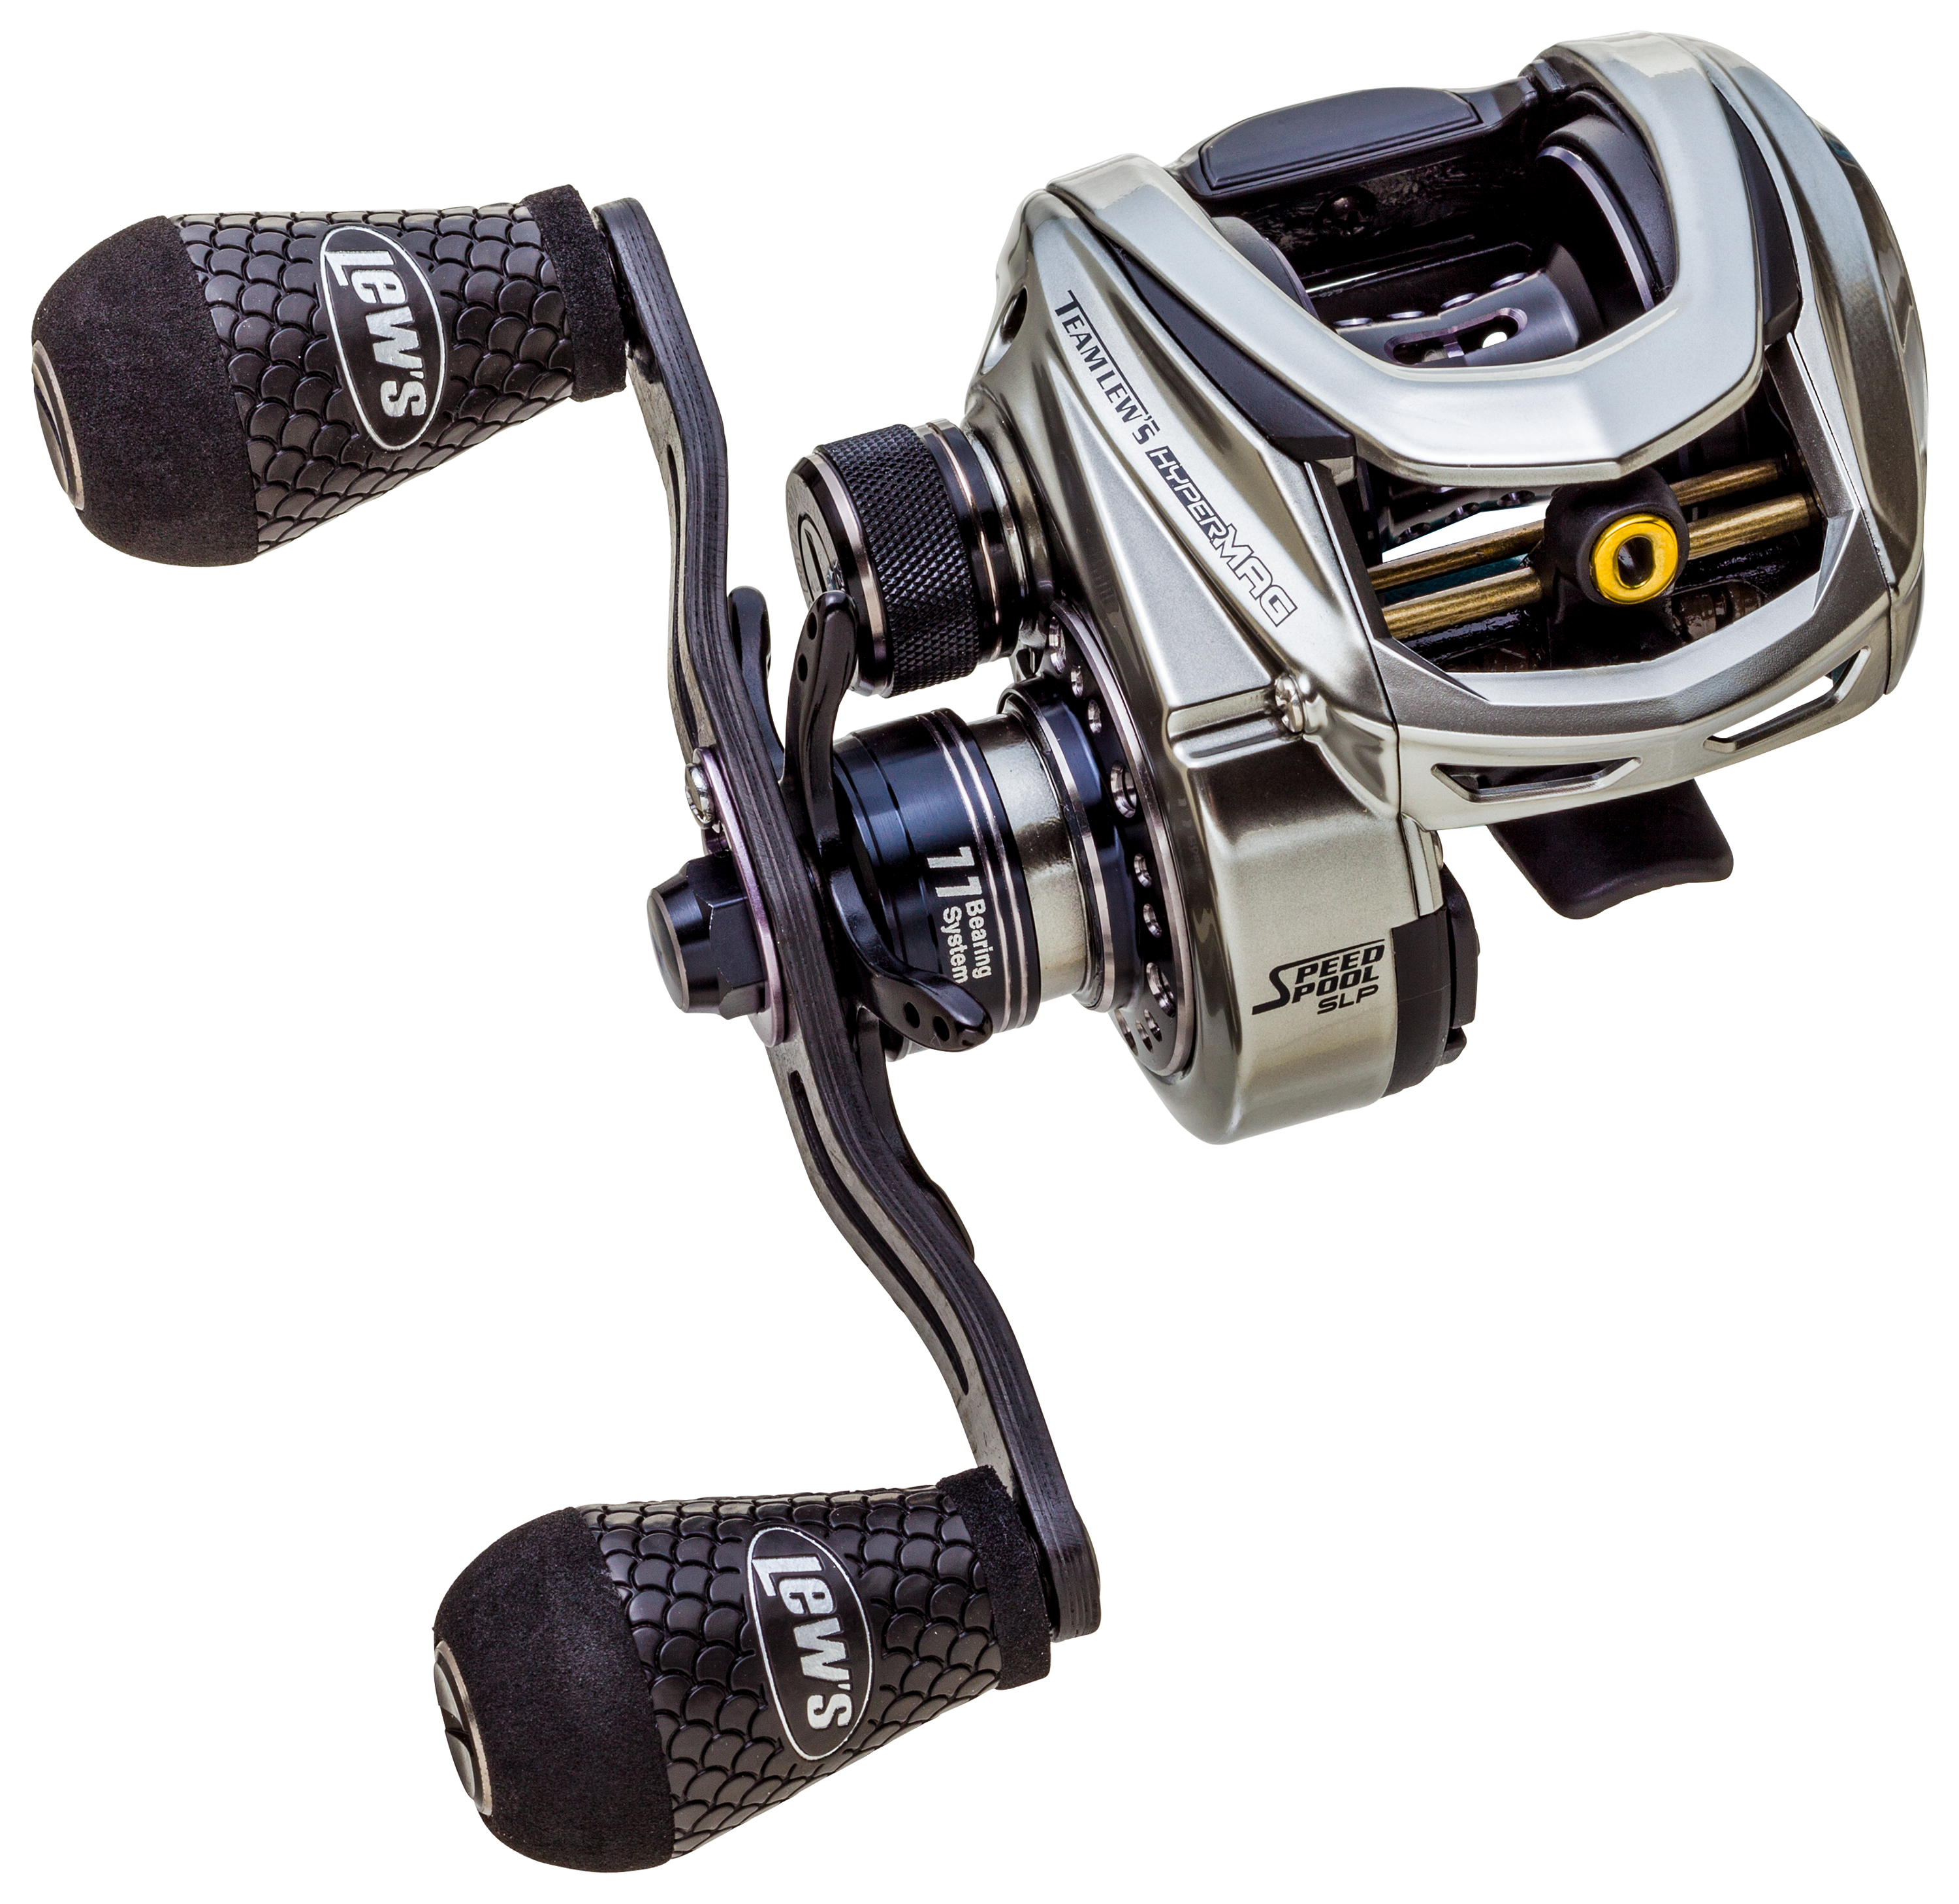 Pre-Owned Lew's HyperMag Speed Spool Casting Reels – Angler's Pro